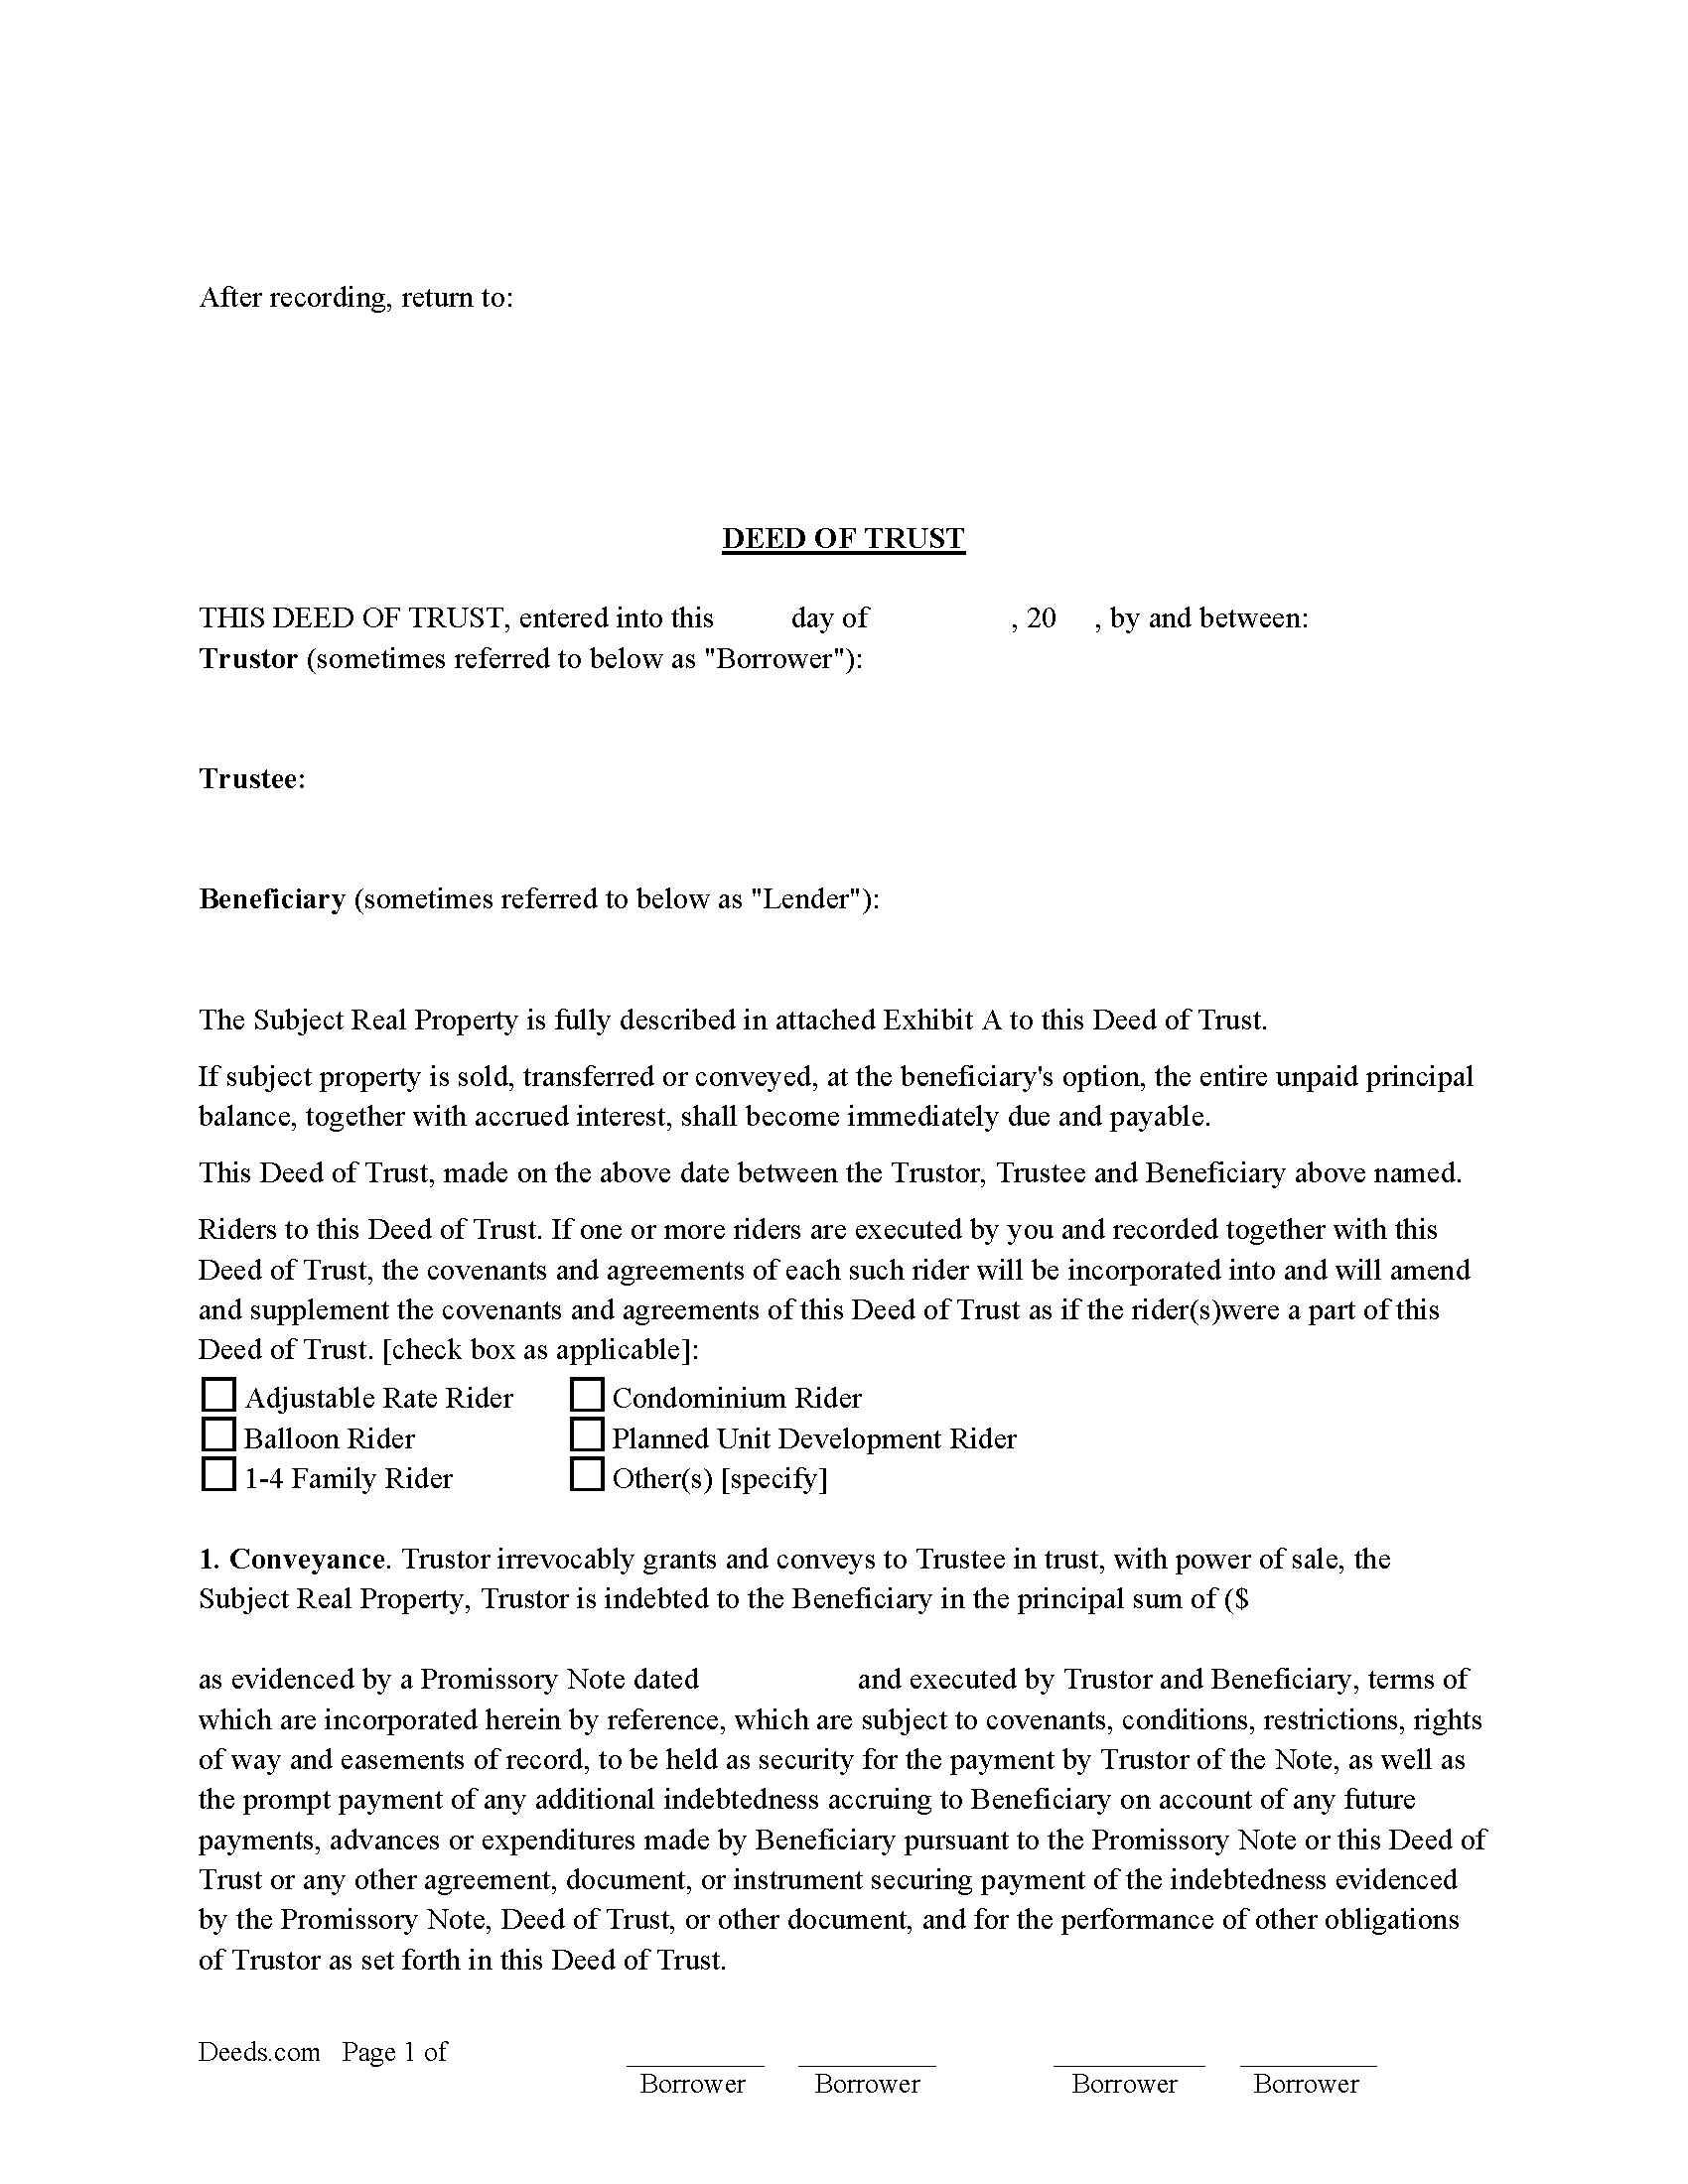 Deed of Trust and Promissory Note